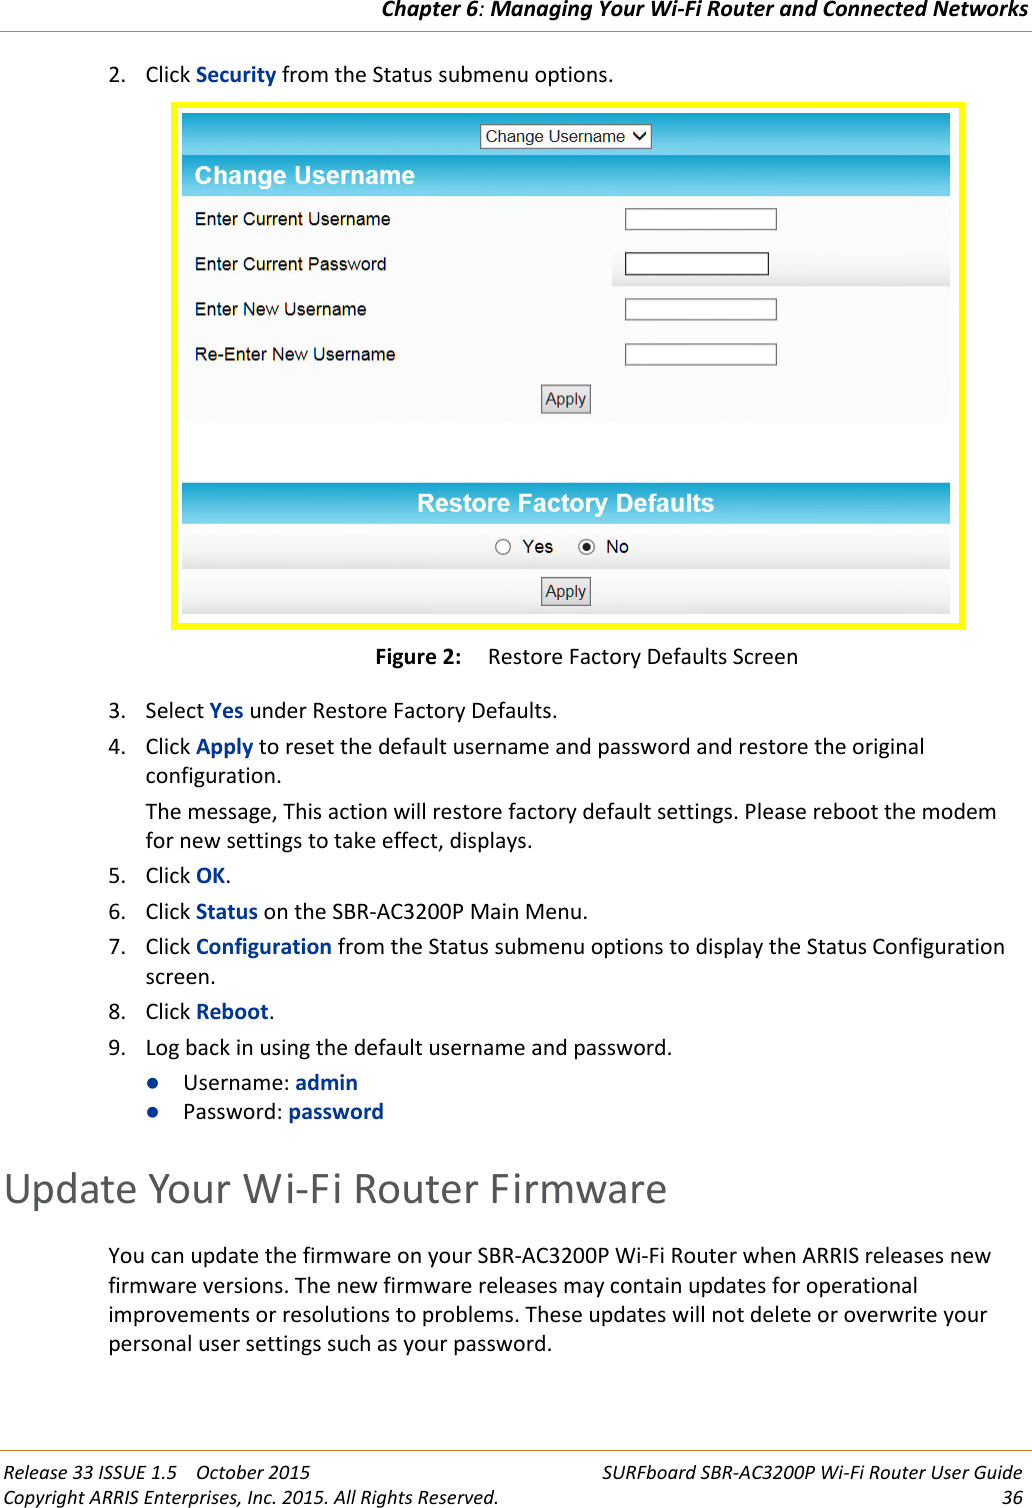 Chapter 6:Managing Your Wi-Fi Router and Connected NetworksRelease 33 ISSUE 1.5 October 2015 SURFboard SBR-AC3200P Wi-Fi Router User GuideCopyright ARRIS Enterprises, Inc. 2015. All Rights Reserved. 362. Click Security from the Status submenu options.Figure 2: Restore Factory Defaults Screen3. Select Yes under Restore Factory Defaults.4. Click Apply to reset the default username and password and restore the originalconfiguration.The message, This action will restore factory default settings. Please reboot the modemfor new settings to take effect, displays.5. Click OK.6. Click Status on the SBR-AC3200P Main Menu.7. Click Configuration from the Status submenu options to display the Status Configurationscreen.8. Click Reboot.9. Log back in using the default username and password.Username: adminPassword: passwordUpdate Your Wi-Fi Router FirmwareYou can update the firmware on your SBR-AC3200P Wi-Fi Router when ARRIS releases newfirmware versions. The new firmware releases may contain updates for operationalimprovements or resolutions to problems. These updates will not delete or overwrite yourpersonal user settings such as your password.